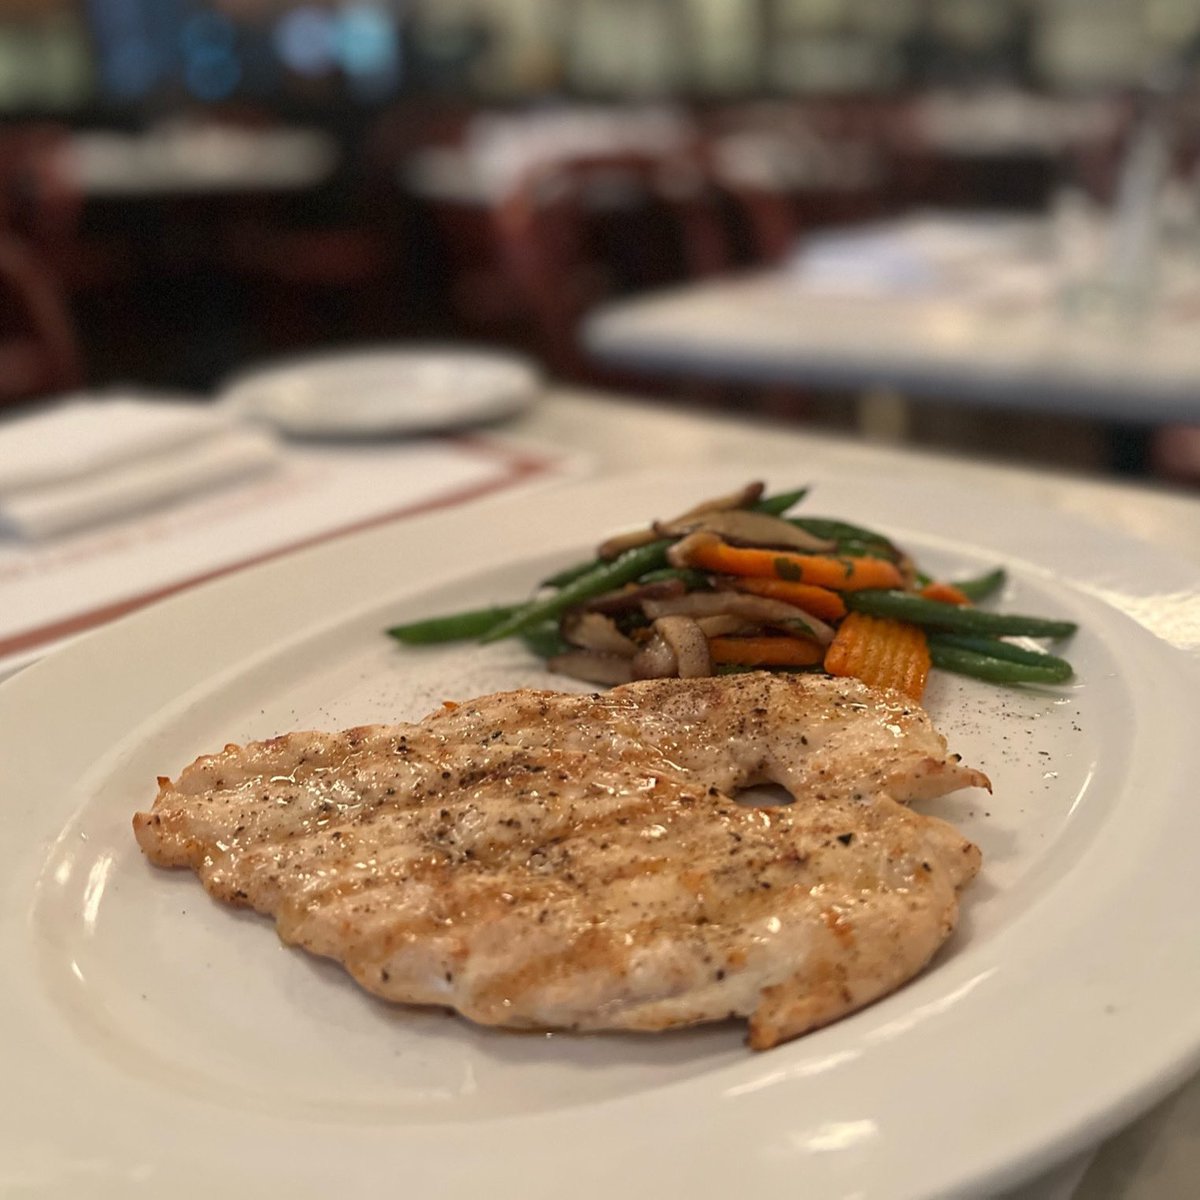 RT @MannysBistroNY: A dish that’s as healthy as it is tasty: Grilled organic chicken paillard with sautéed vegetables. Bon appetit! 
#mannysbistro #grilledchicken #healthyfood #healthylifestyle #healthymeals #healthyeating #healthylunch #healthyeats #nyc…